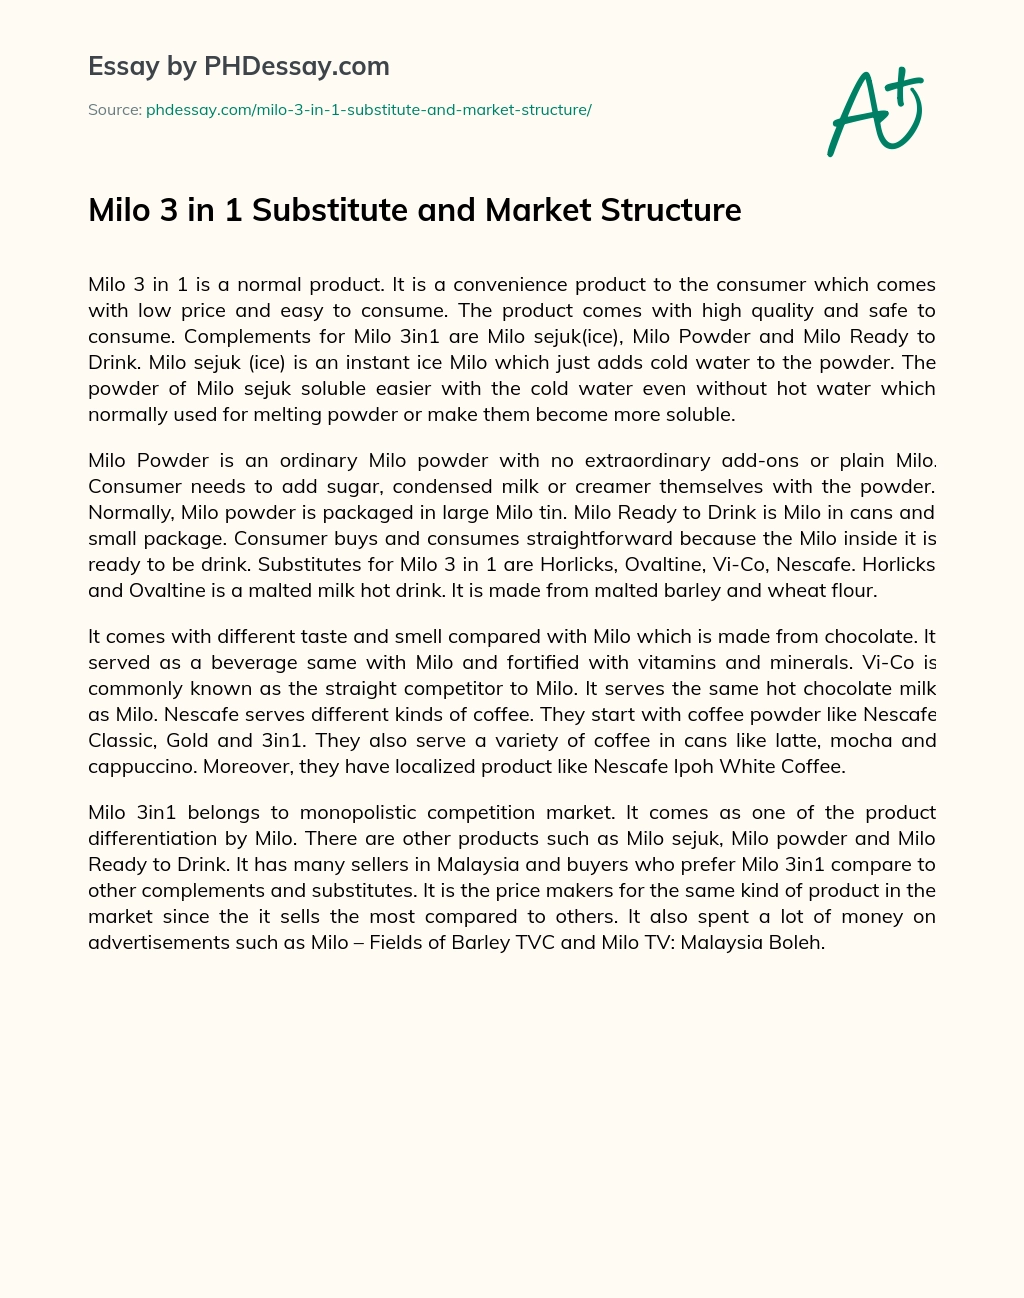 Milo 3 in 1 Substitute and Market Structure essay